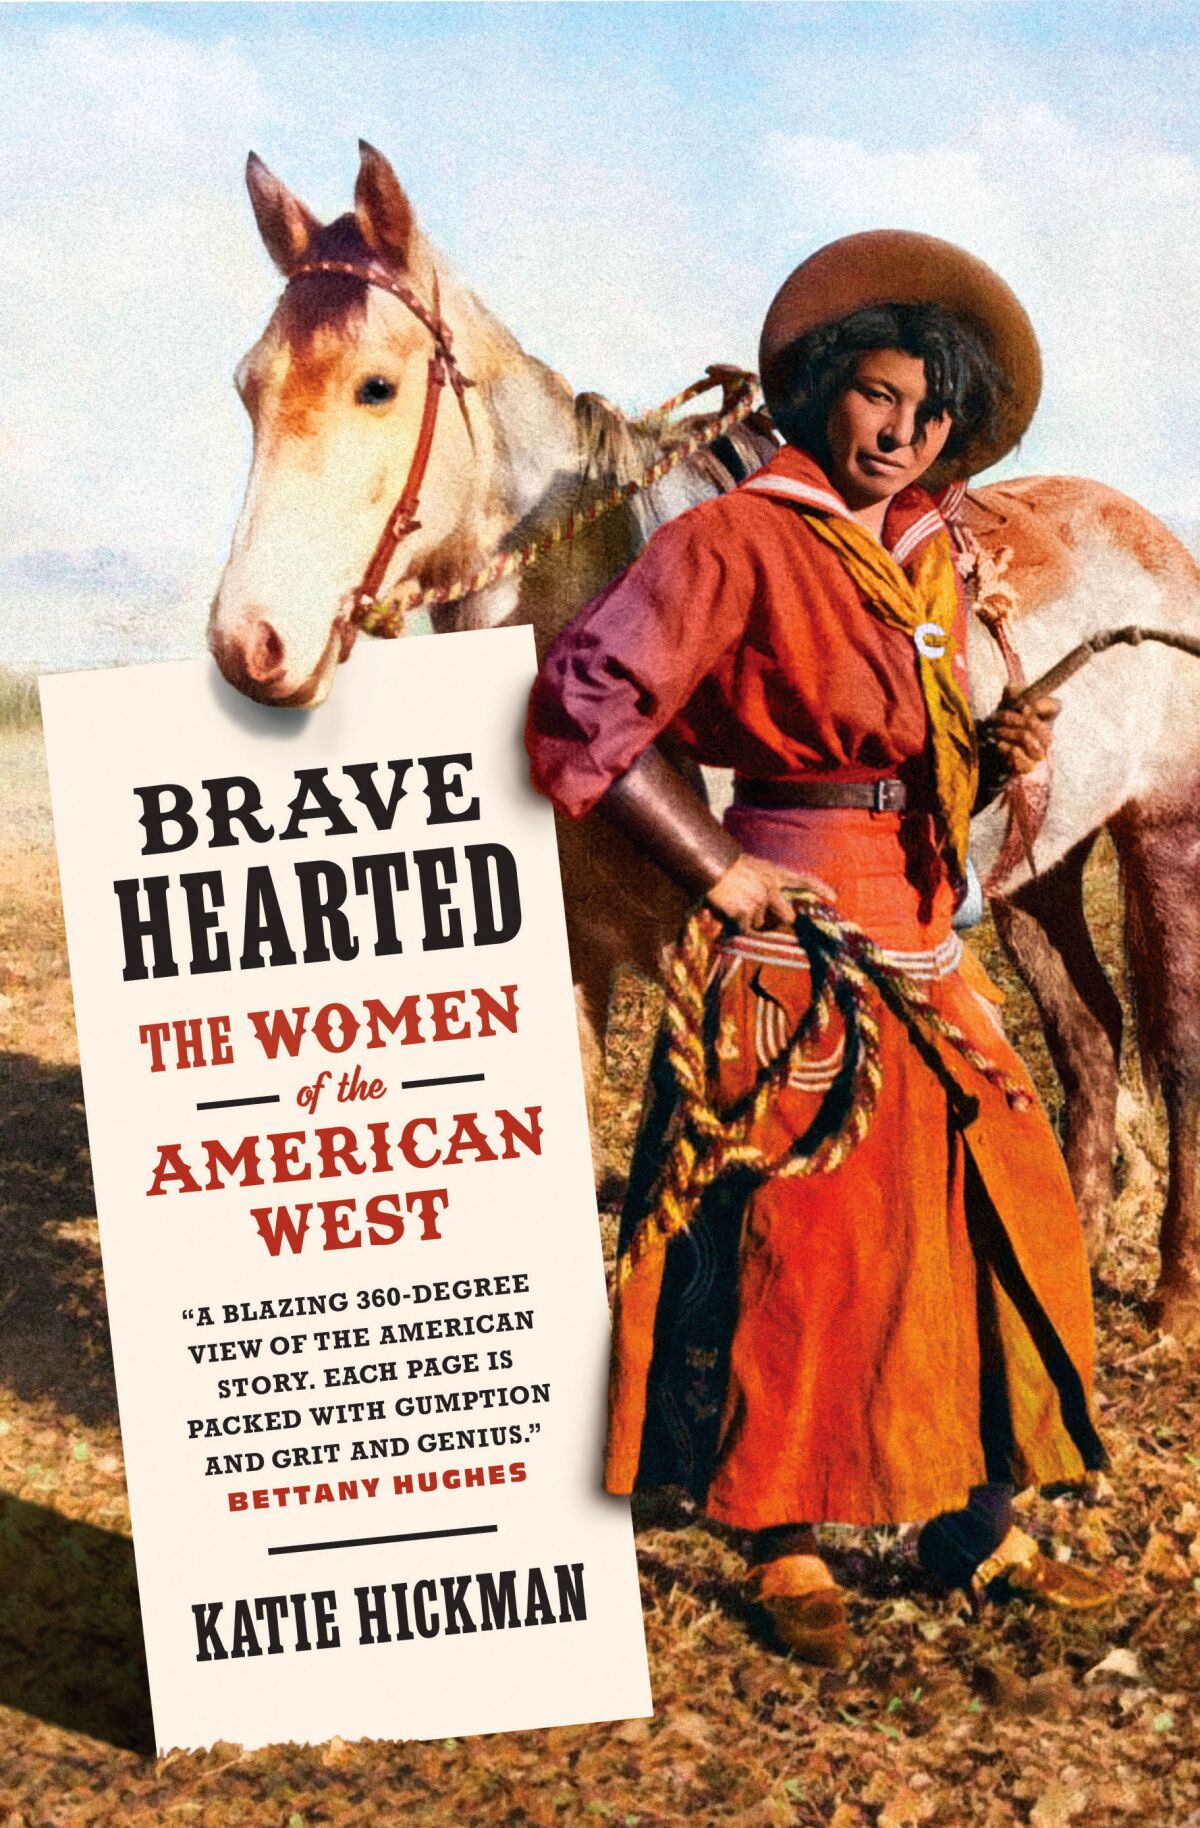 "Brave Hearted: The Women of the American West" by Katie Hickman